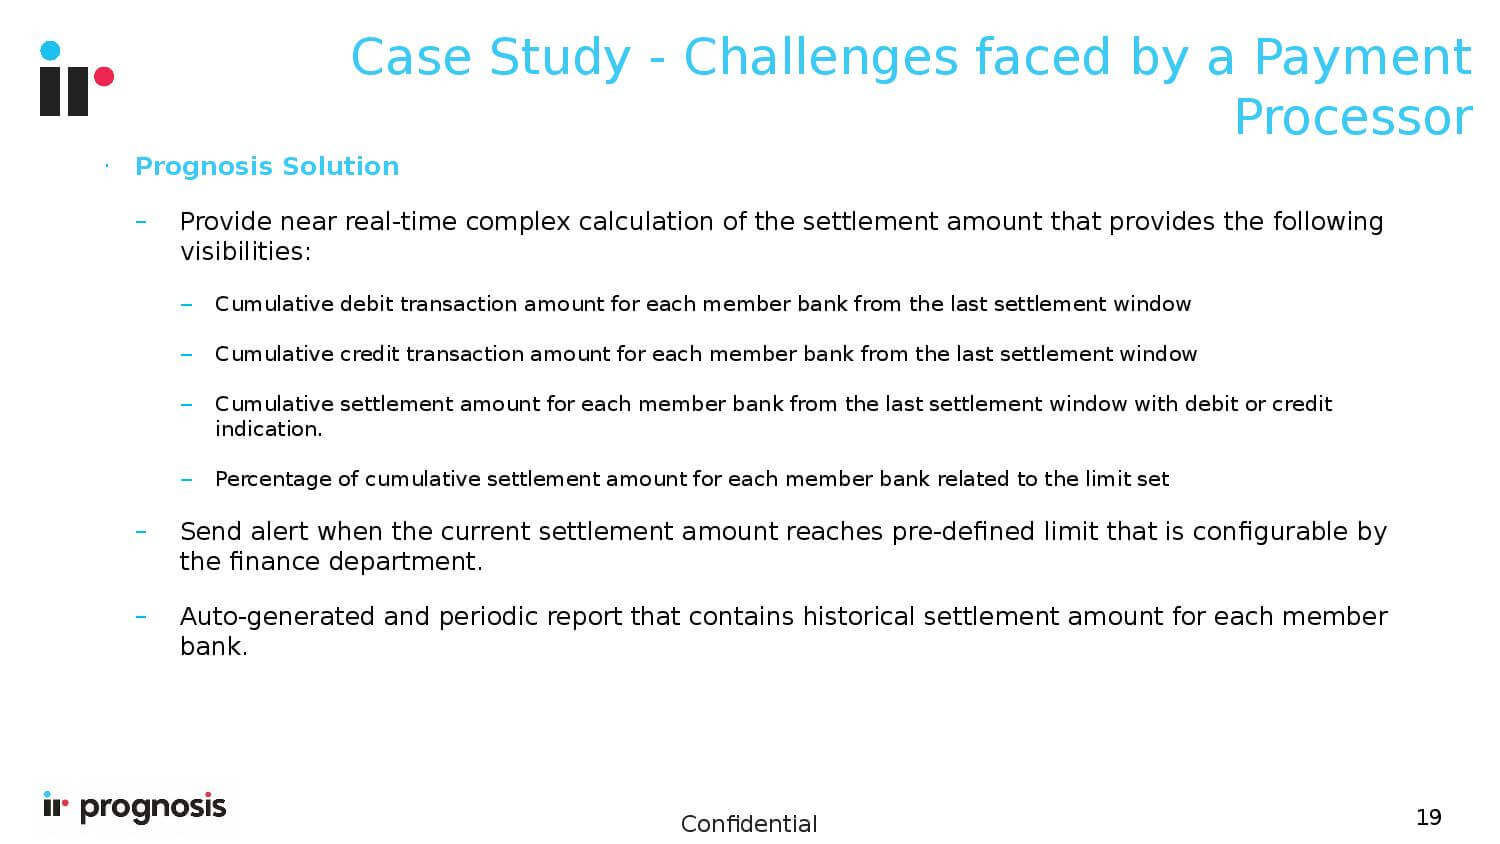 Case Study - Challenges faced by a Payment Processor